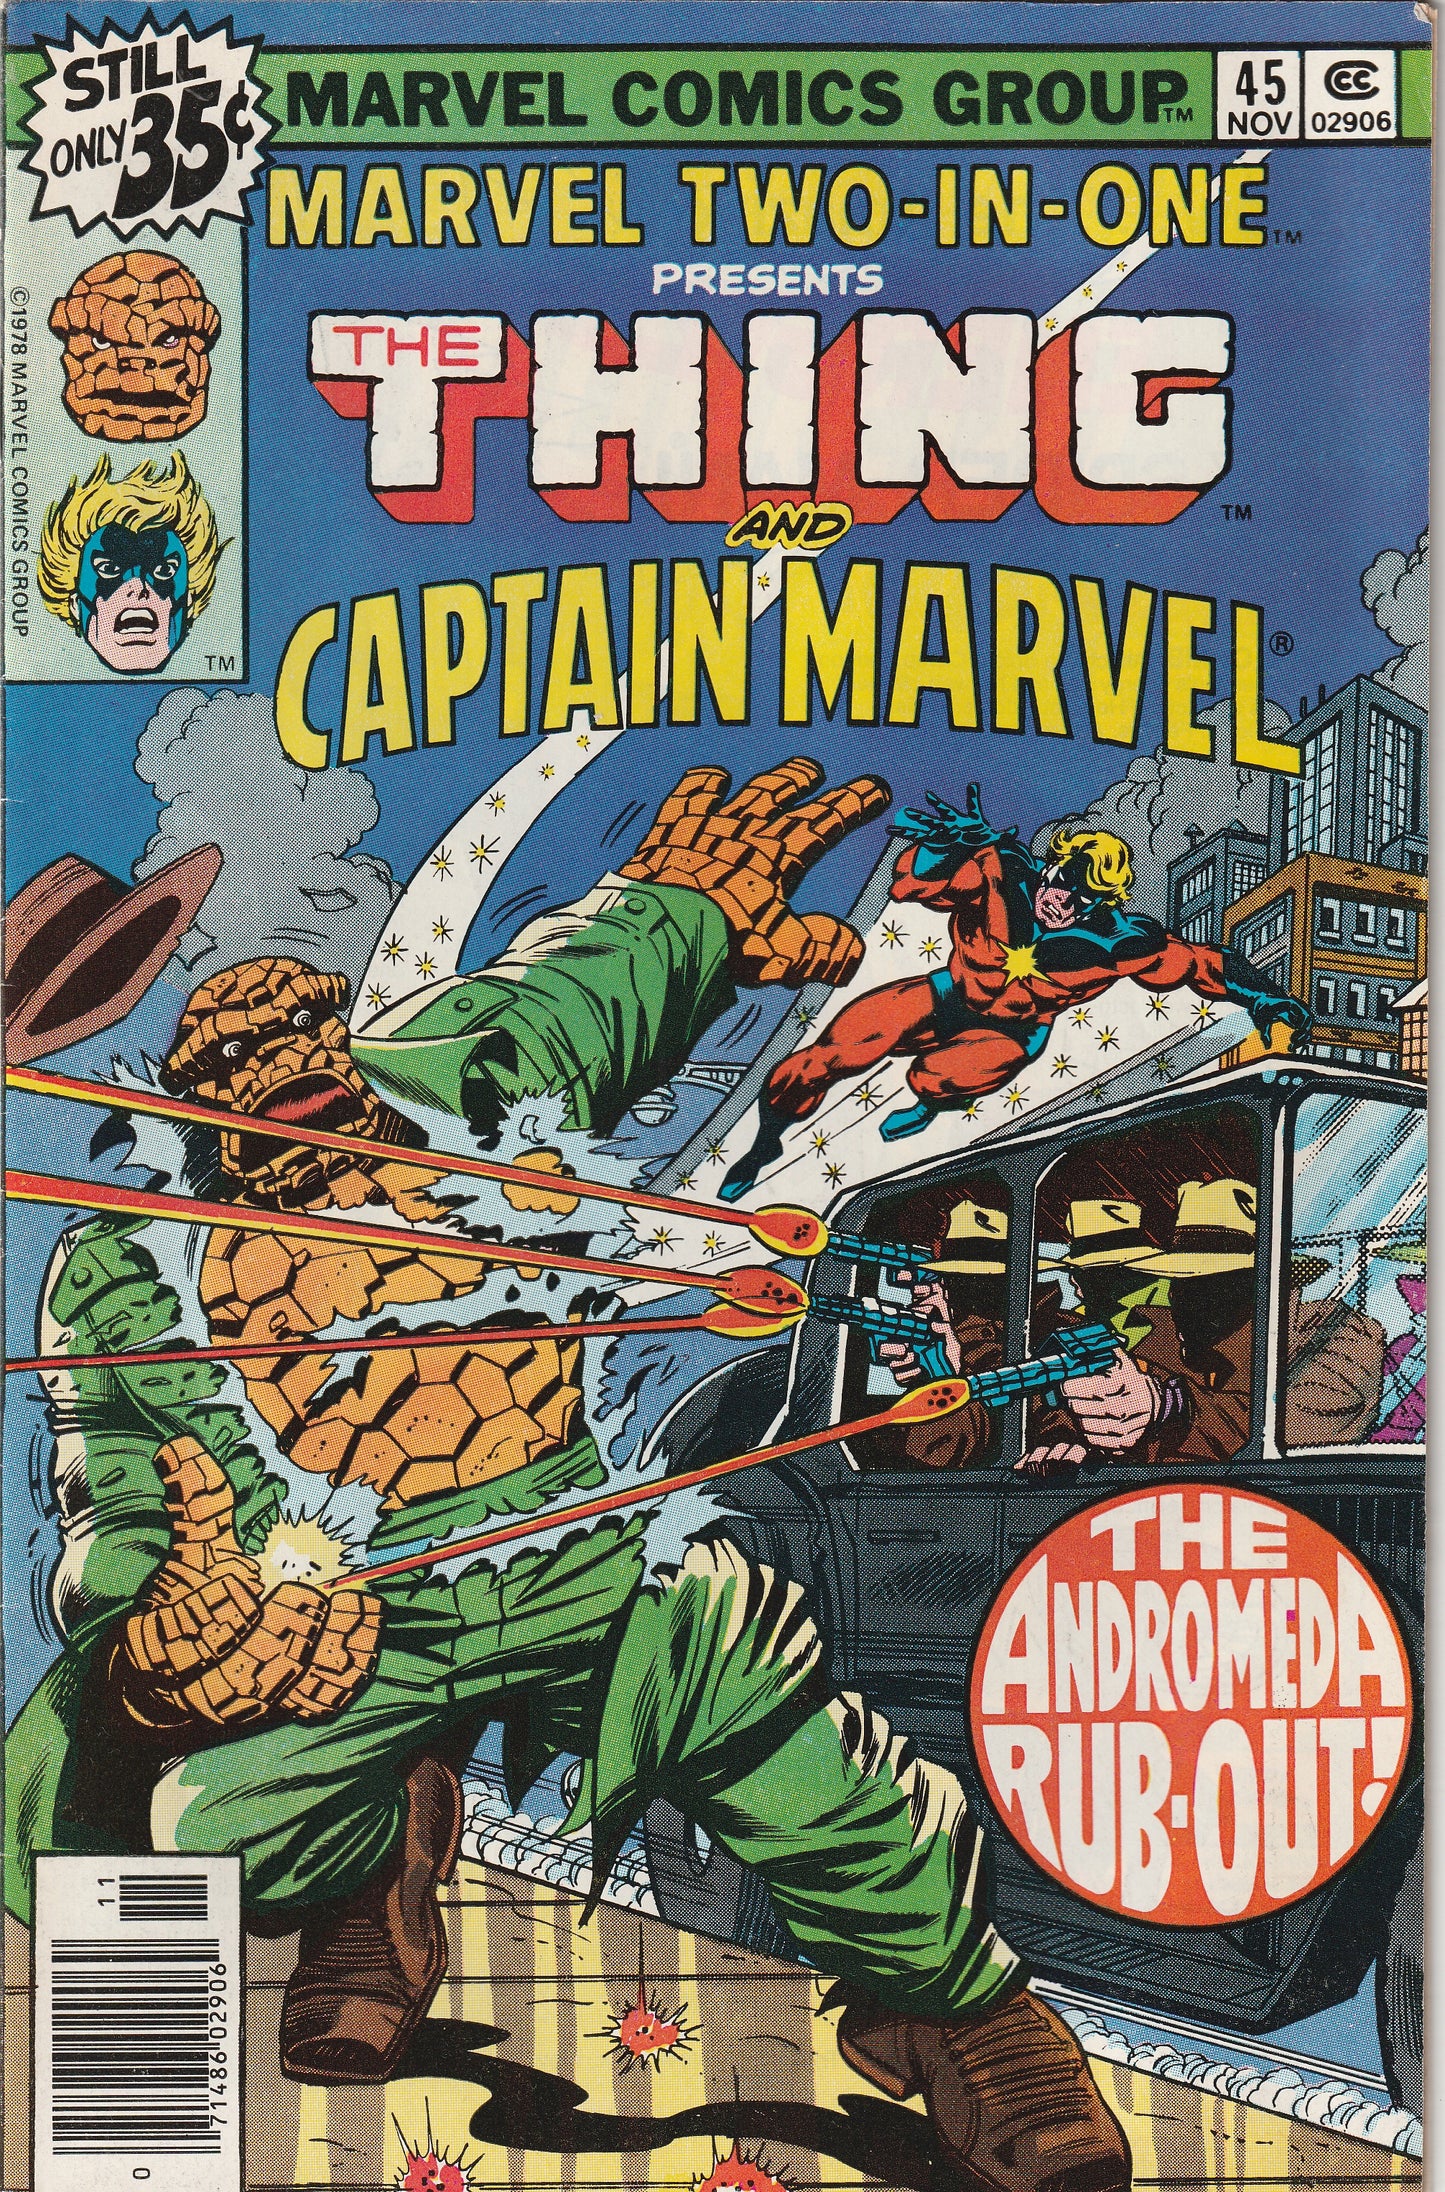 Marvel Two-in-One #45 (1978) - Captain Marvel